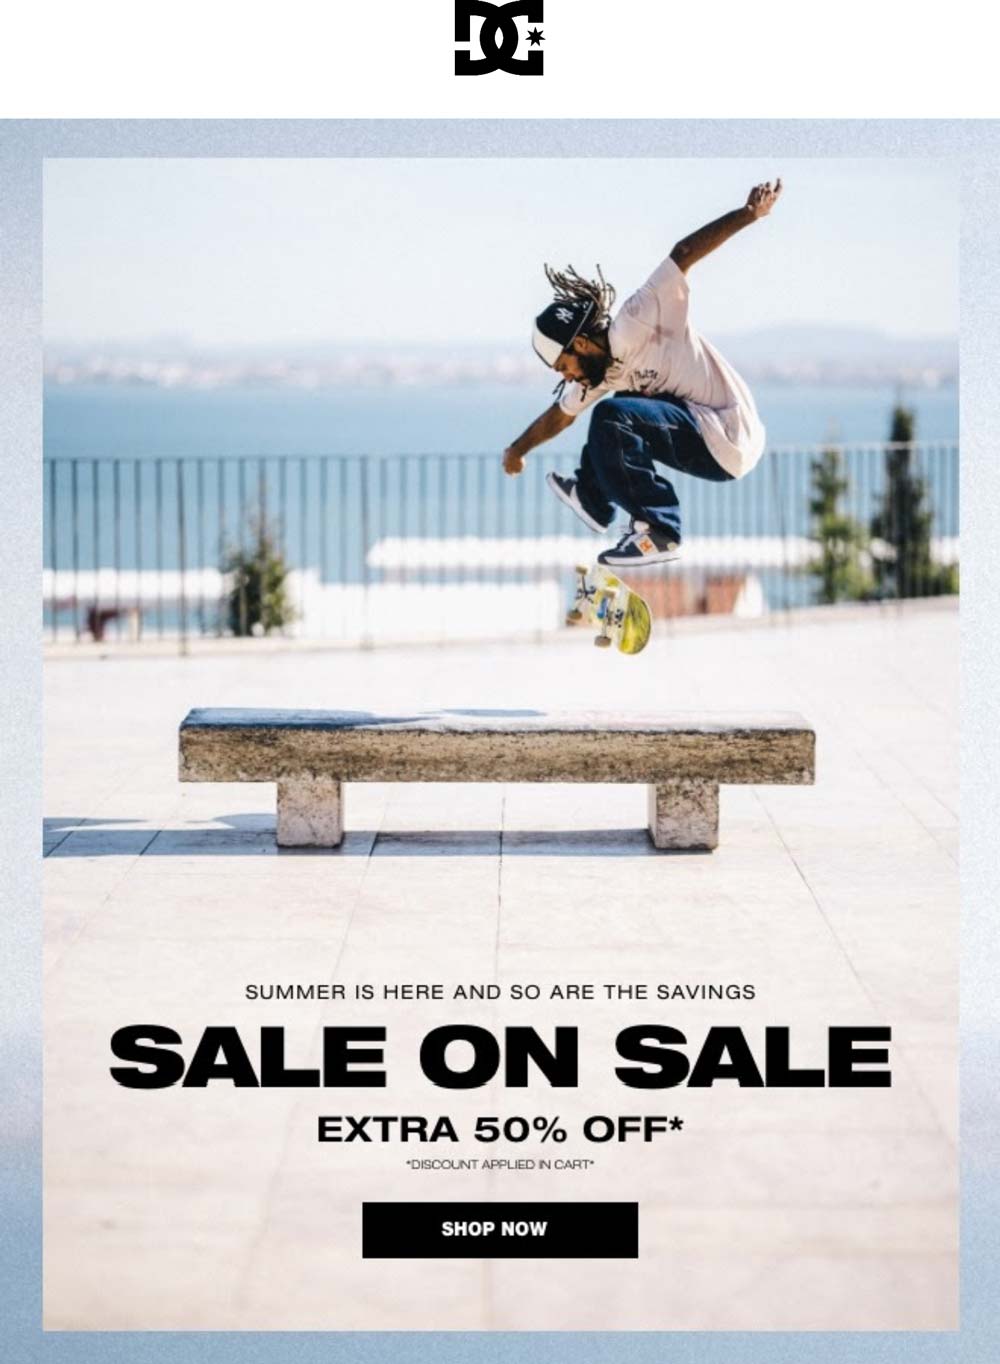 DC Shoes stores Coupon  Extra 50% off sale items online at DC Shoes #dcshoes 